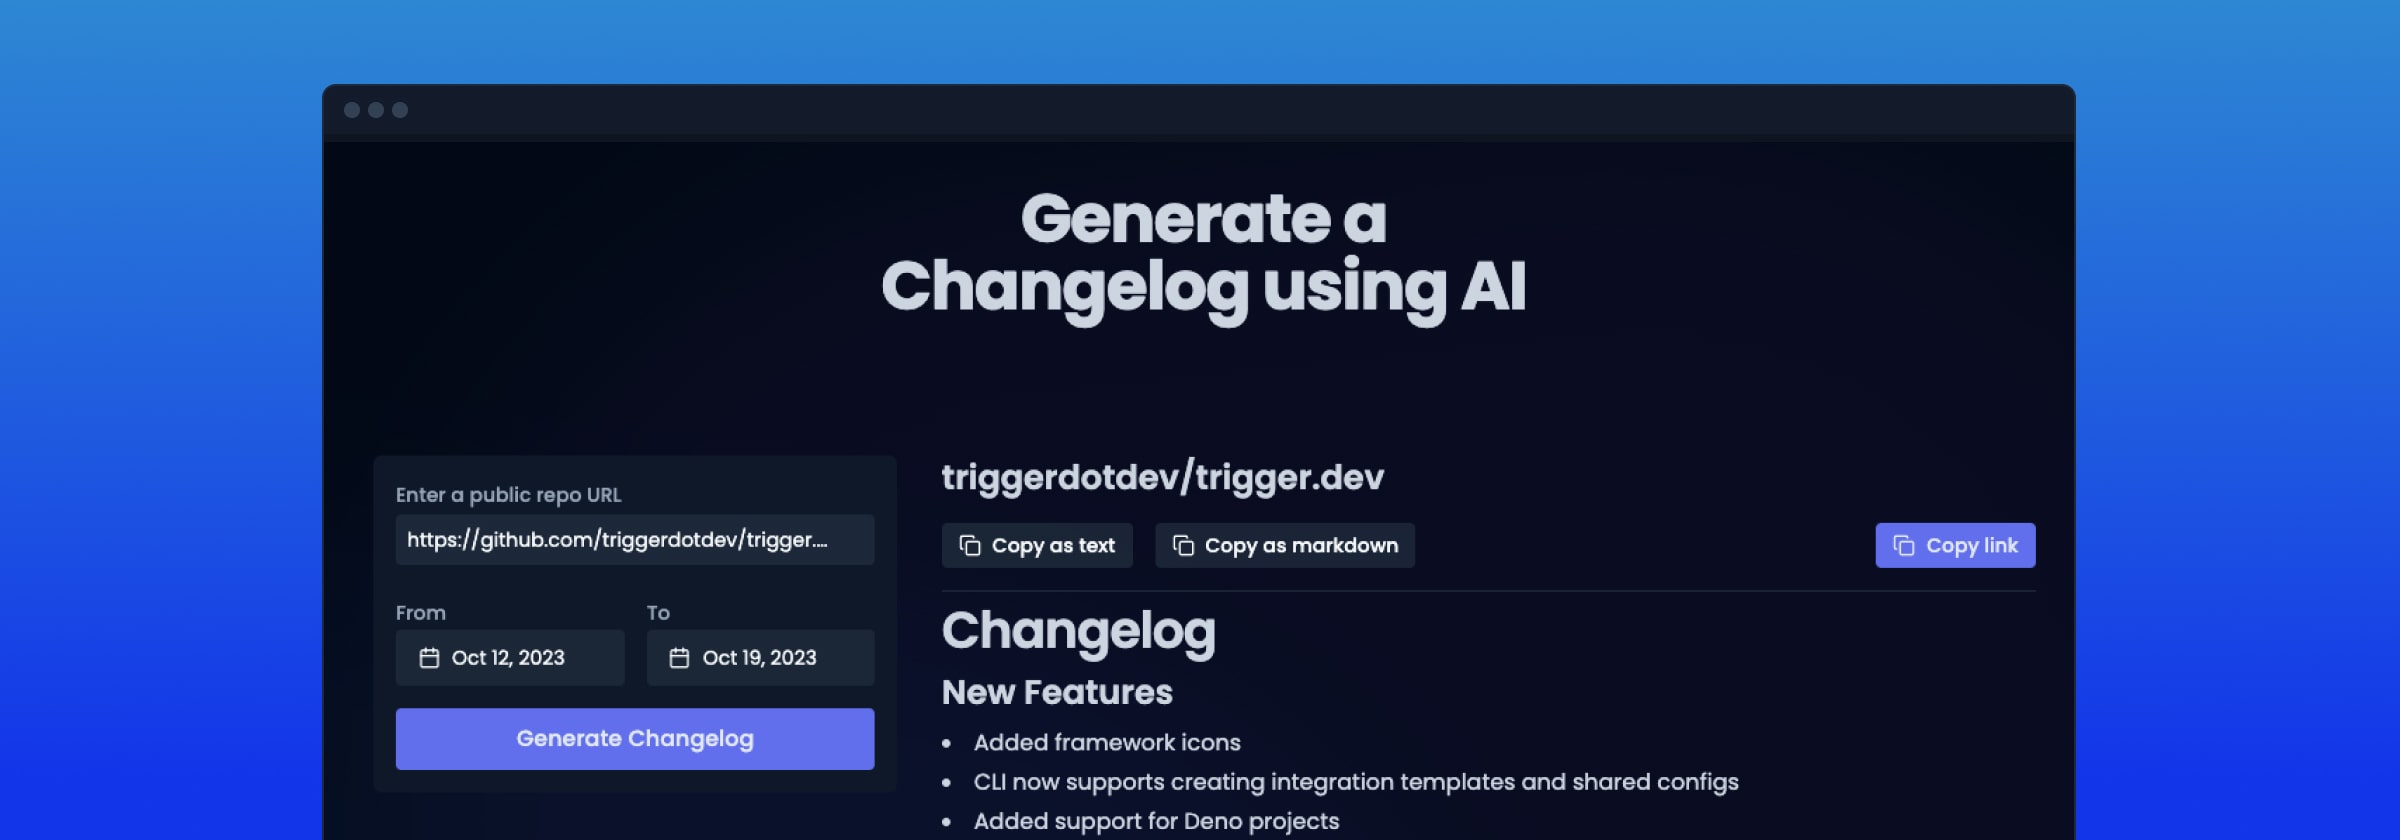 Generate a changelog from GitHub commits using AI